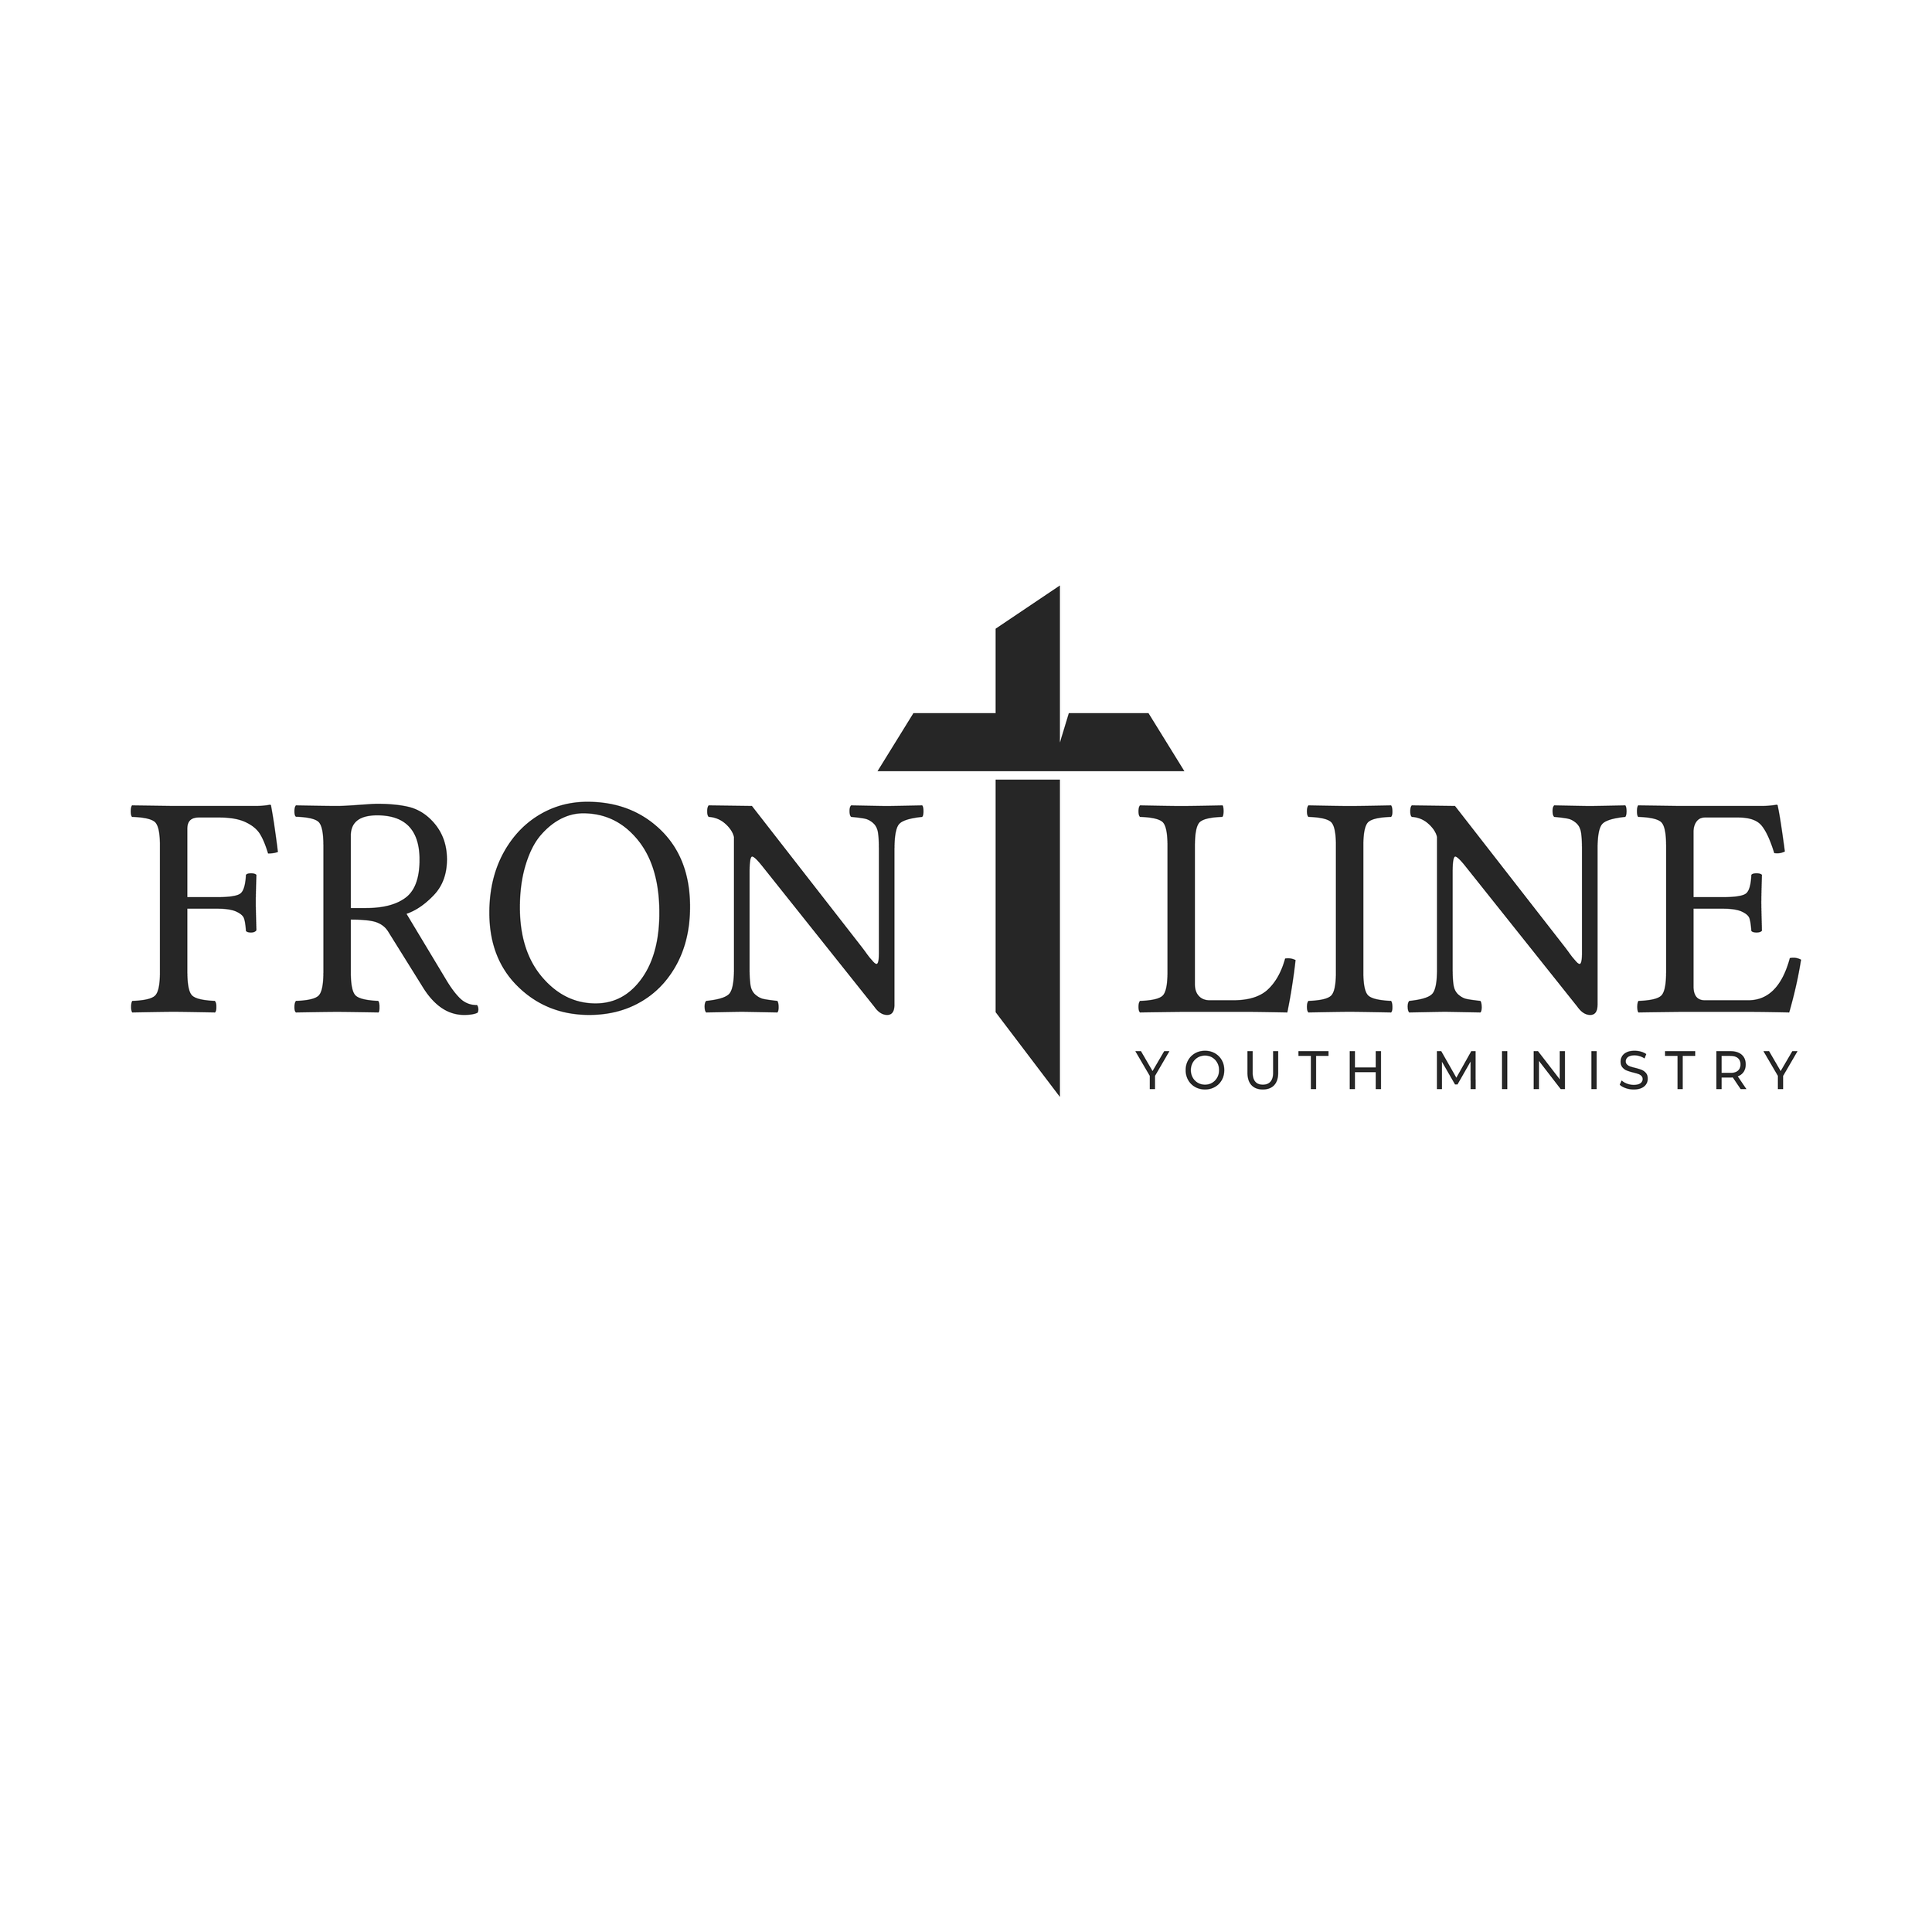 FRONTLINE YOUTH